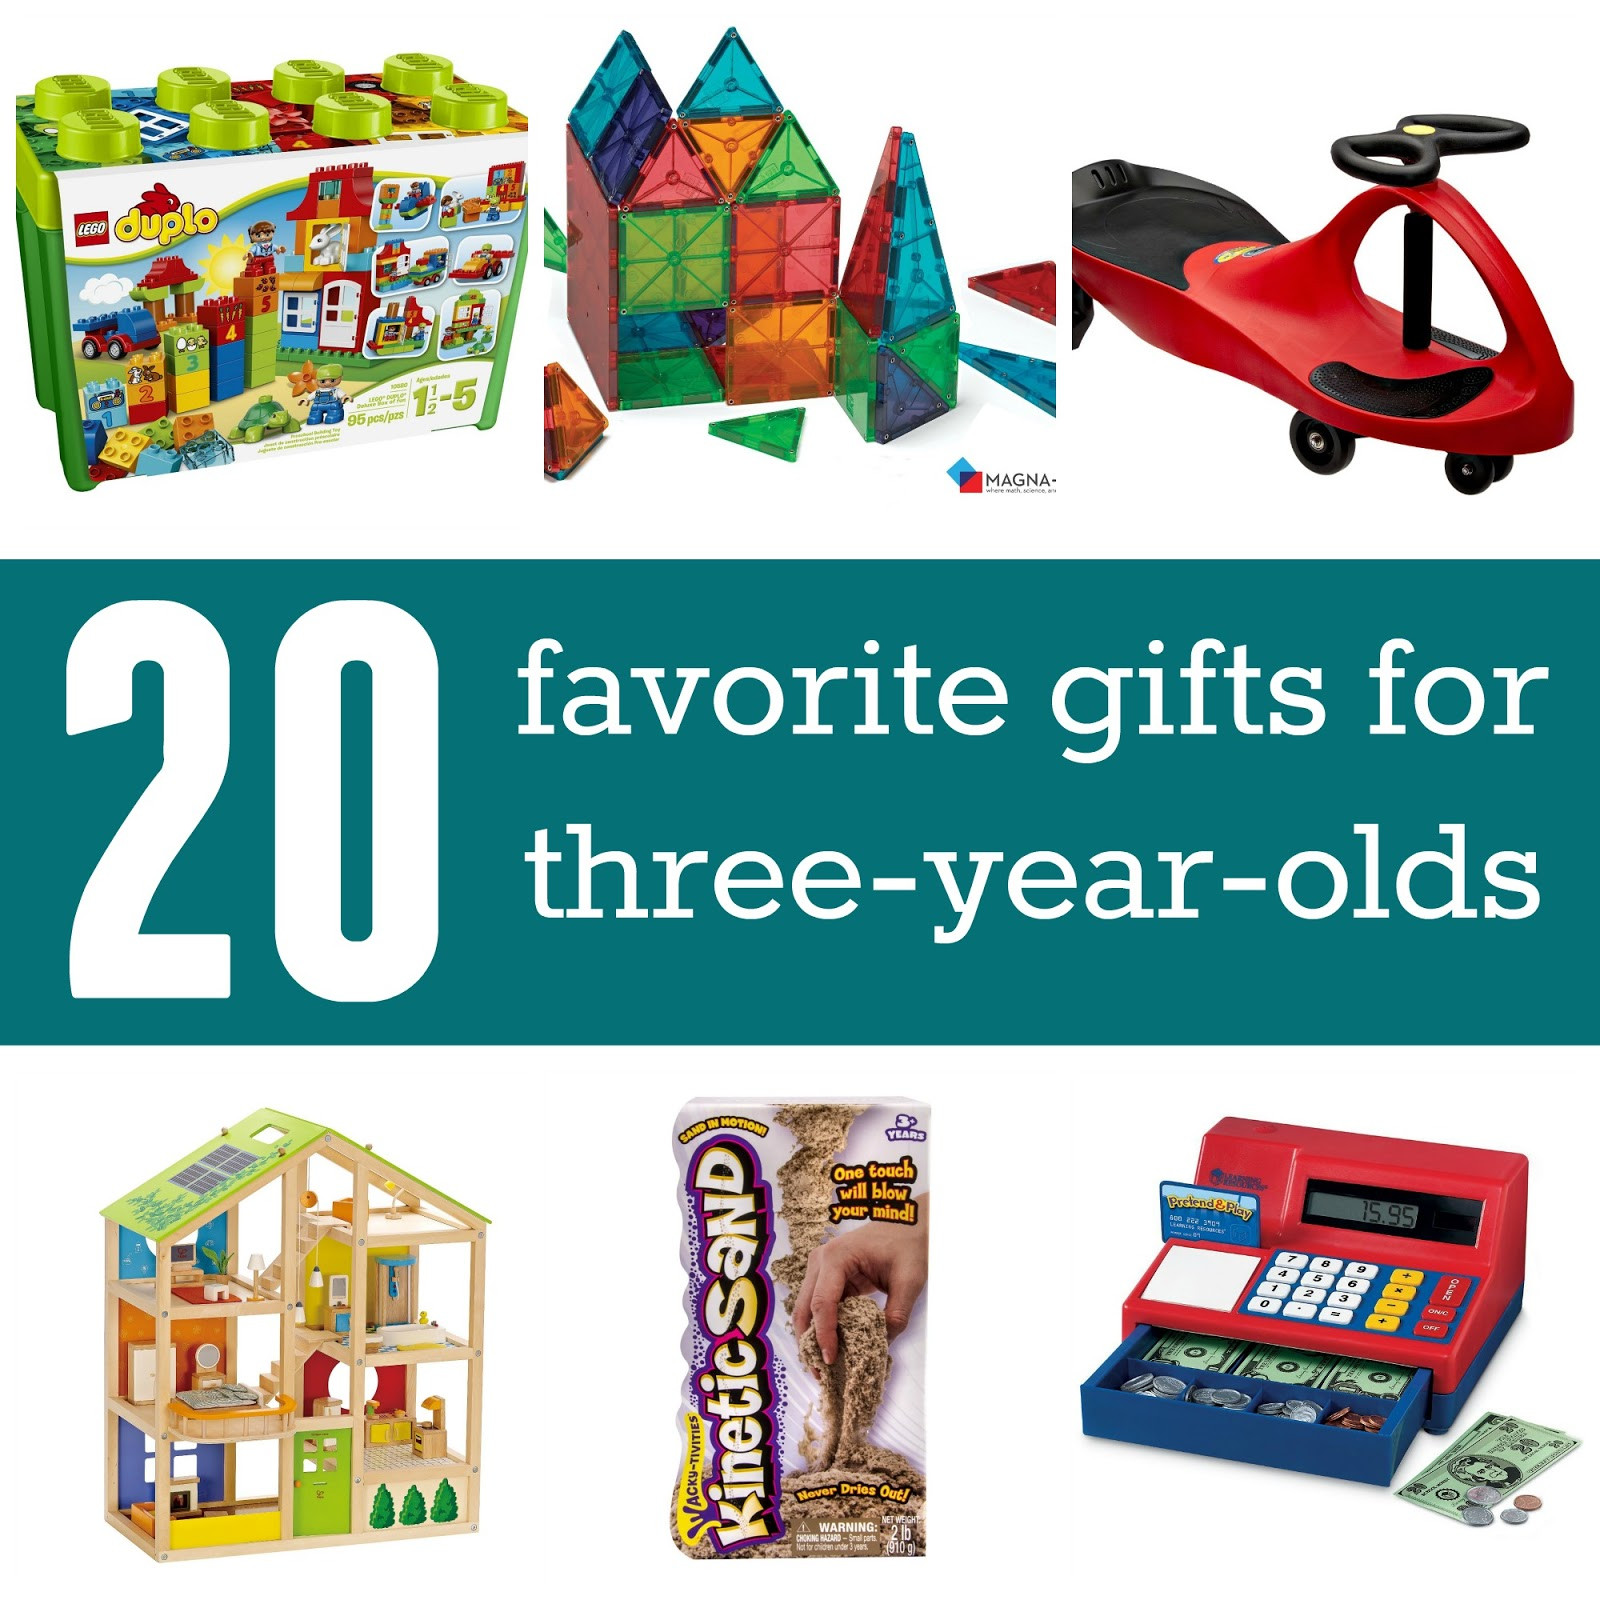 3 Yr Old Birthday Gift Ideas Boys
 Toddler Approved Favorite Gifts for 3 year olds